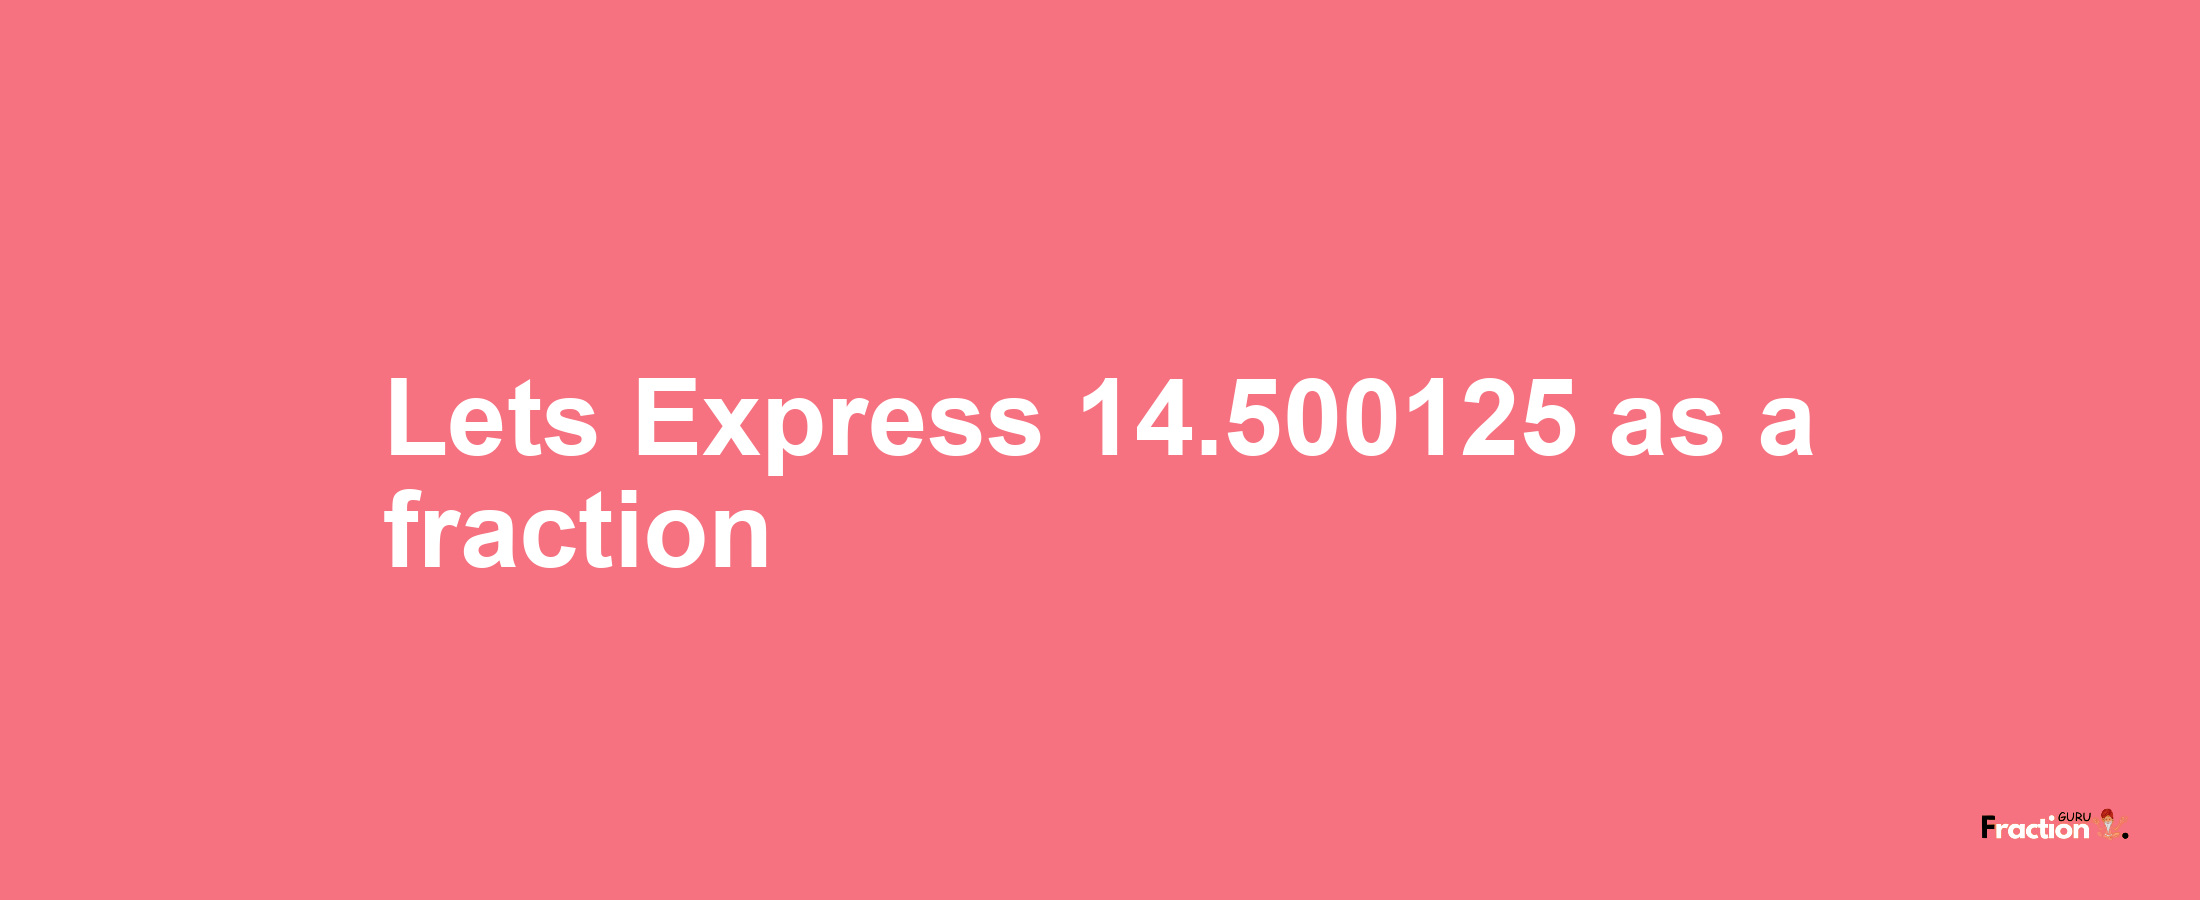 Lets Express 14.500125 as afraction